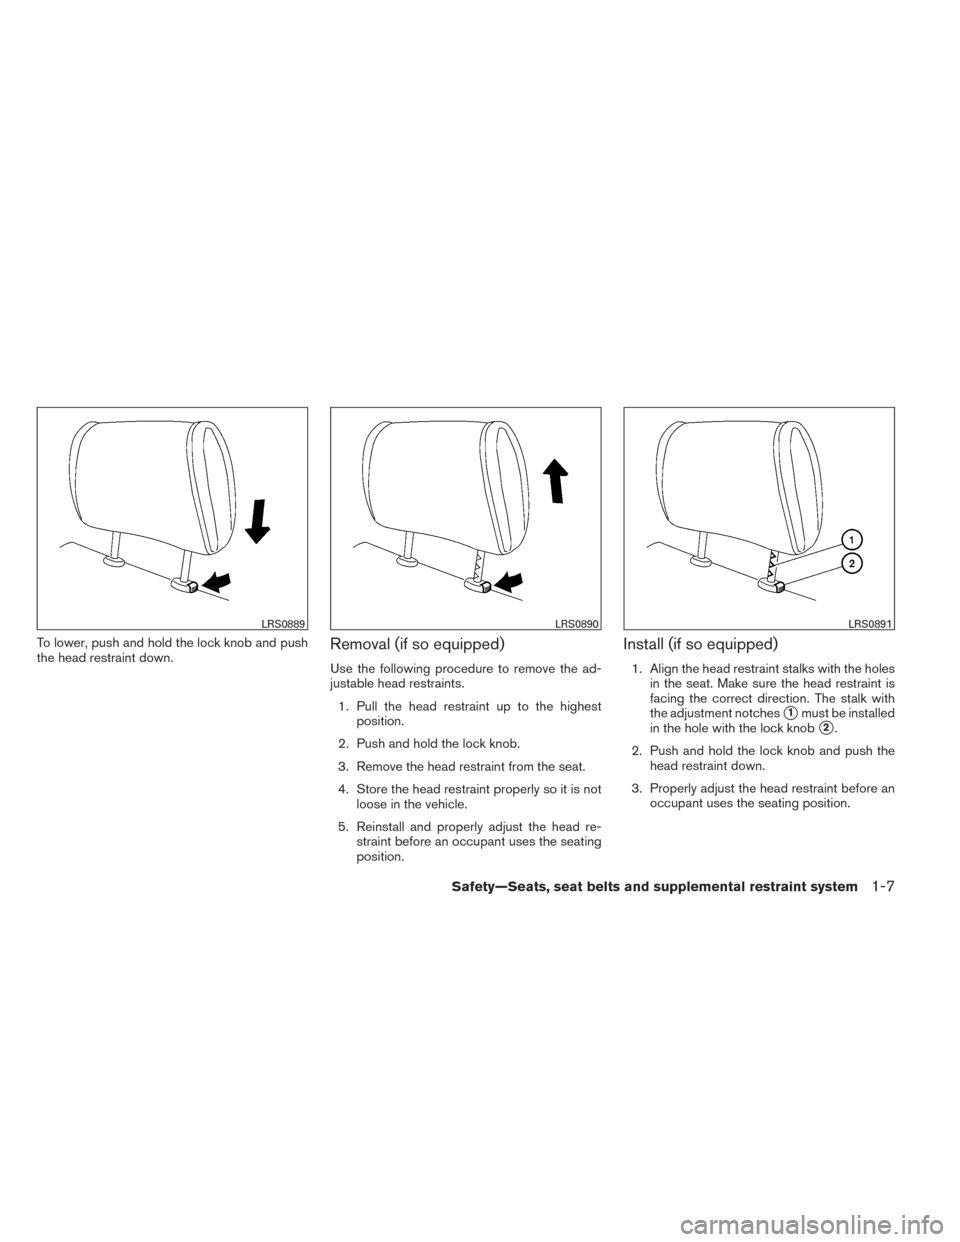 NISSAN VERSA SEDAN 2014 2.G Owners Manual To lower, push and hold the lock knob and push
the head restraint down.Removal (if so equipped)
Use the following procedure to remove the ad-
justable head restraints.1. Pull the head restraint up to 